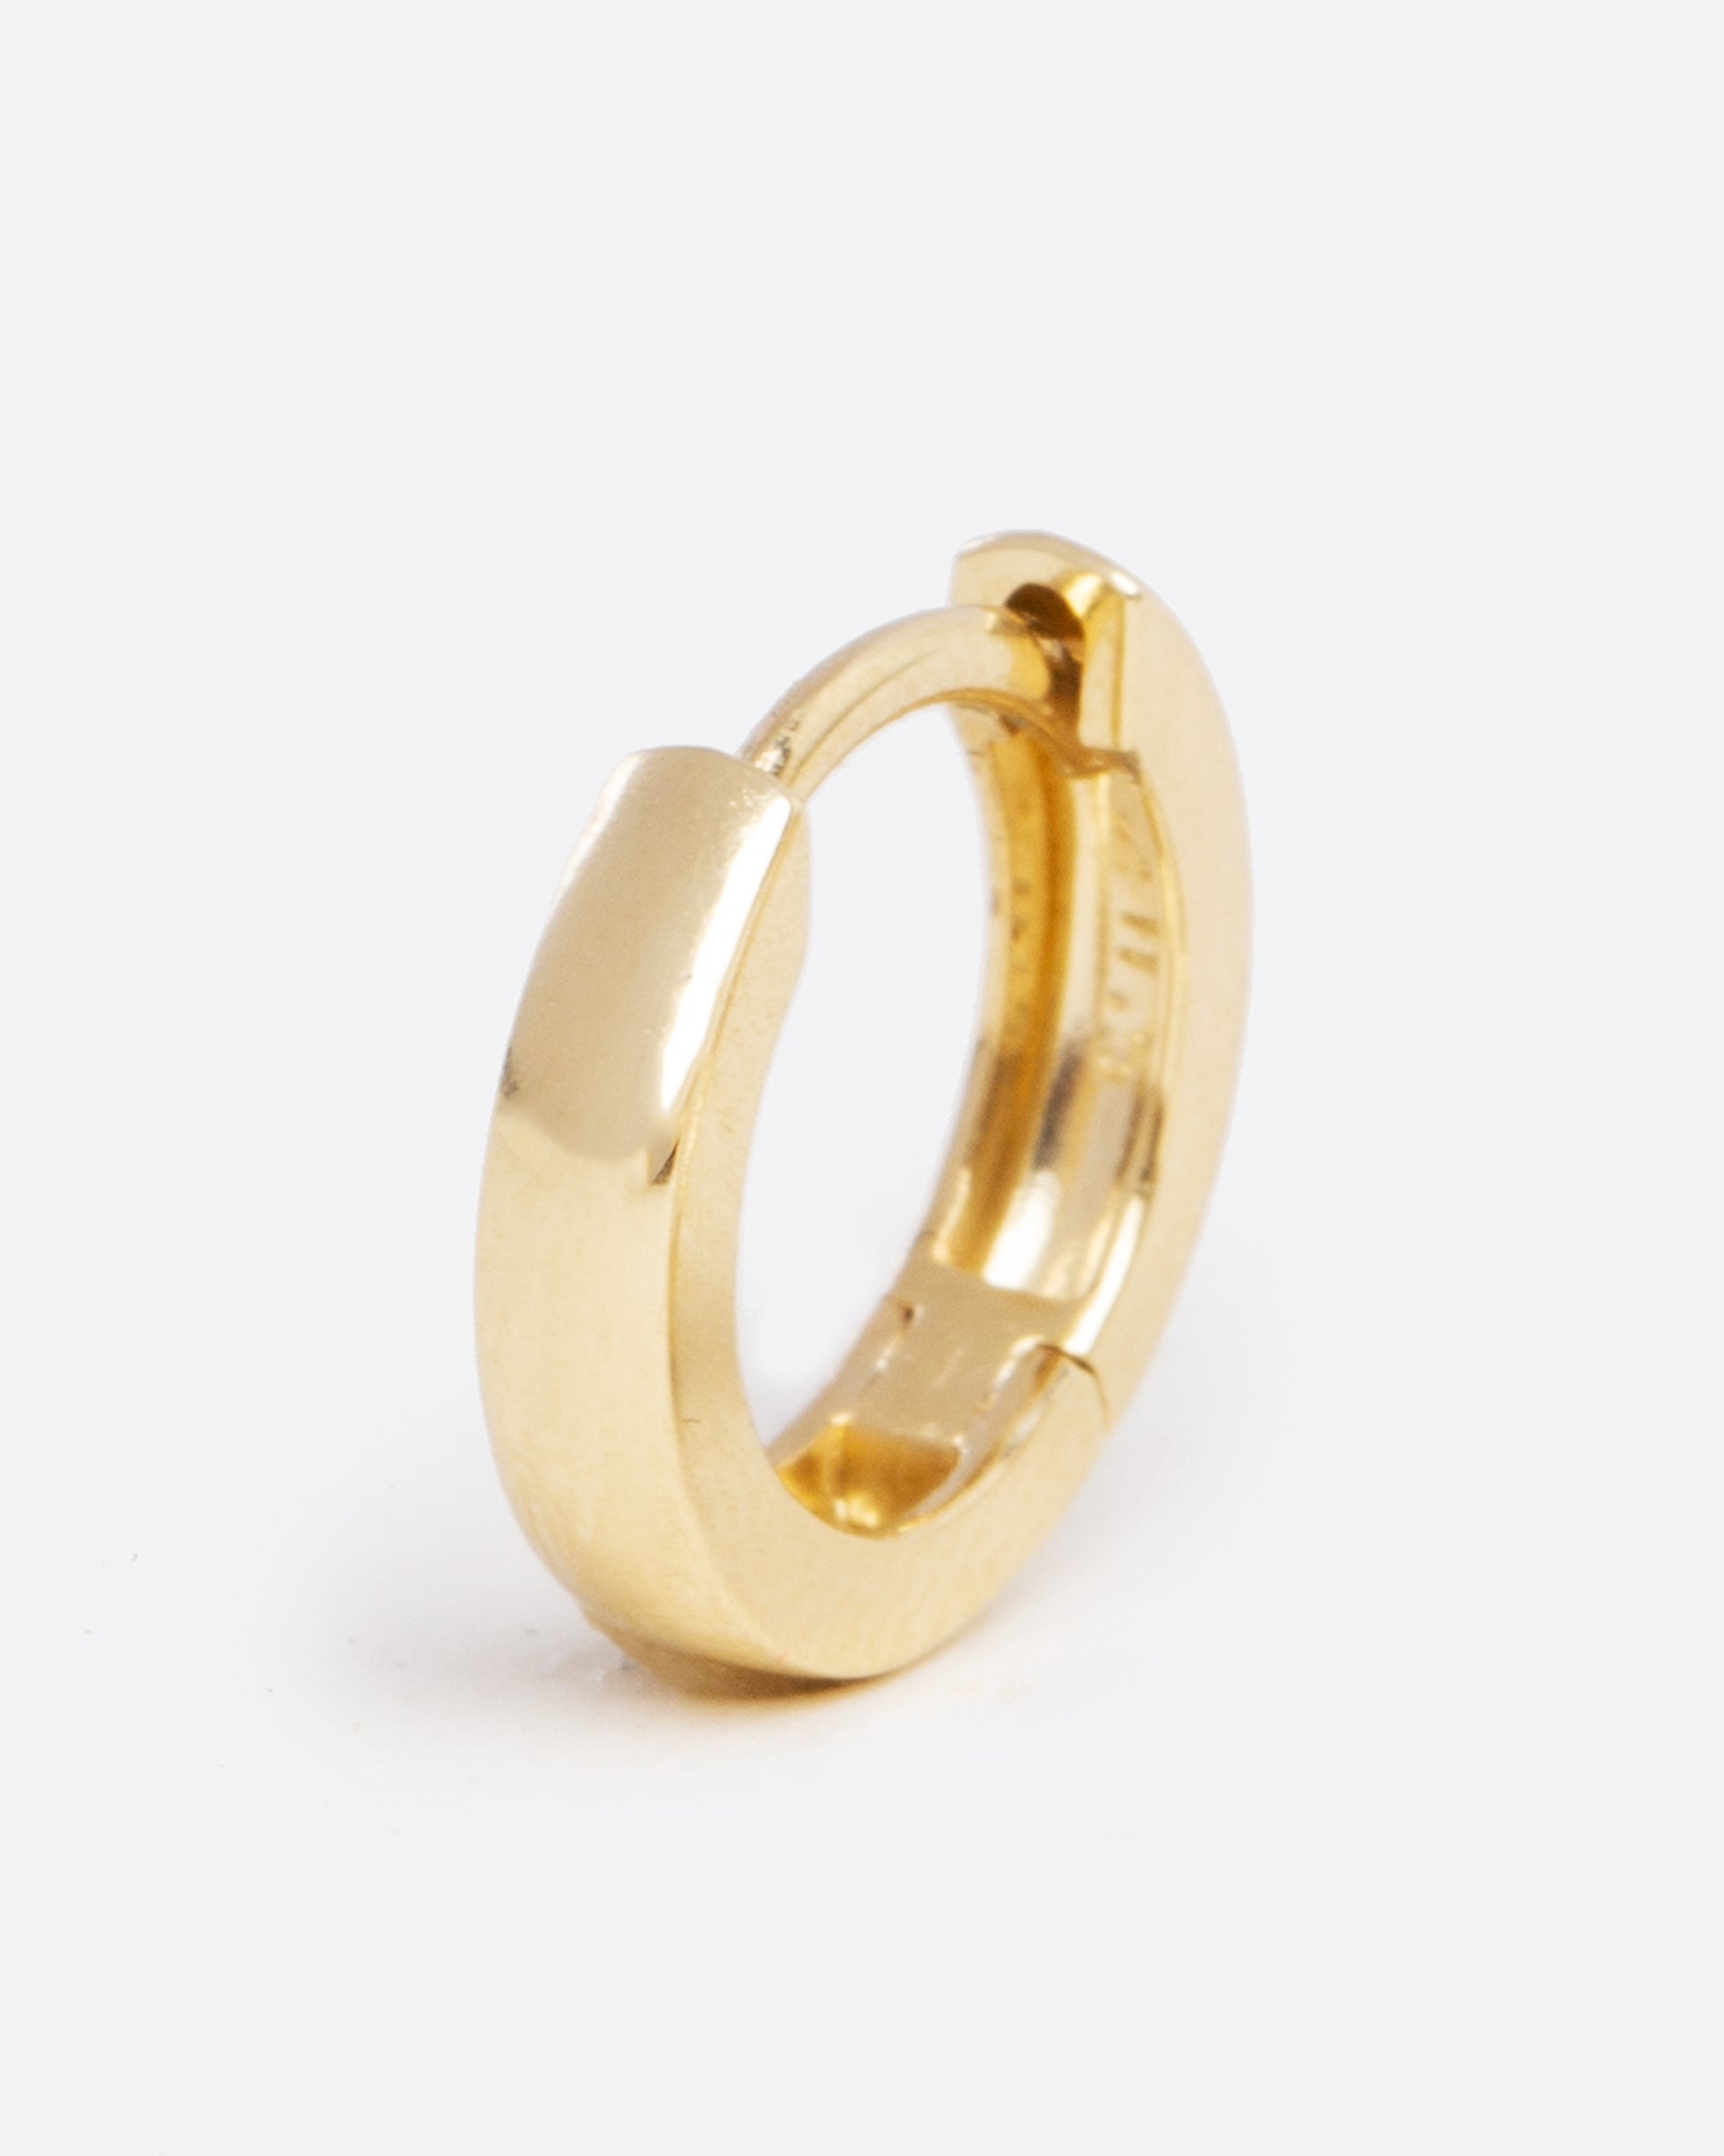 a tiny yellow gold hoop earring with a hinge in the middle